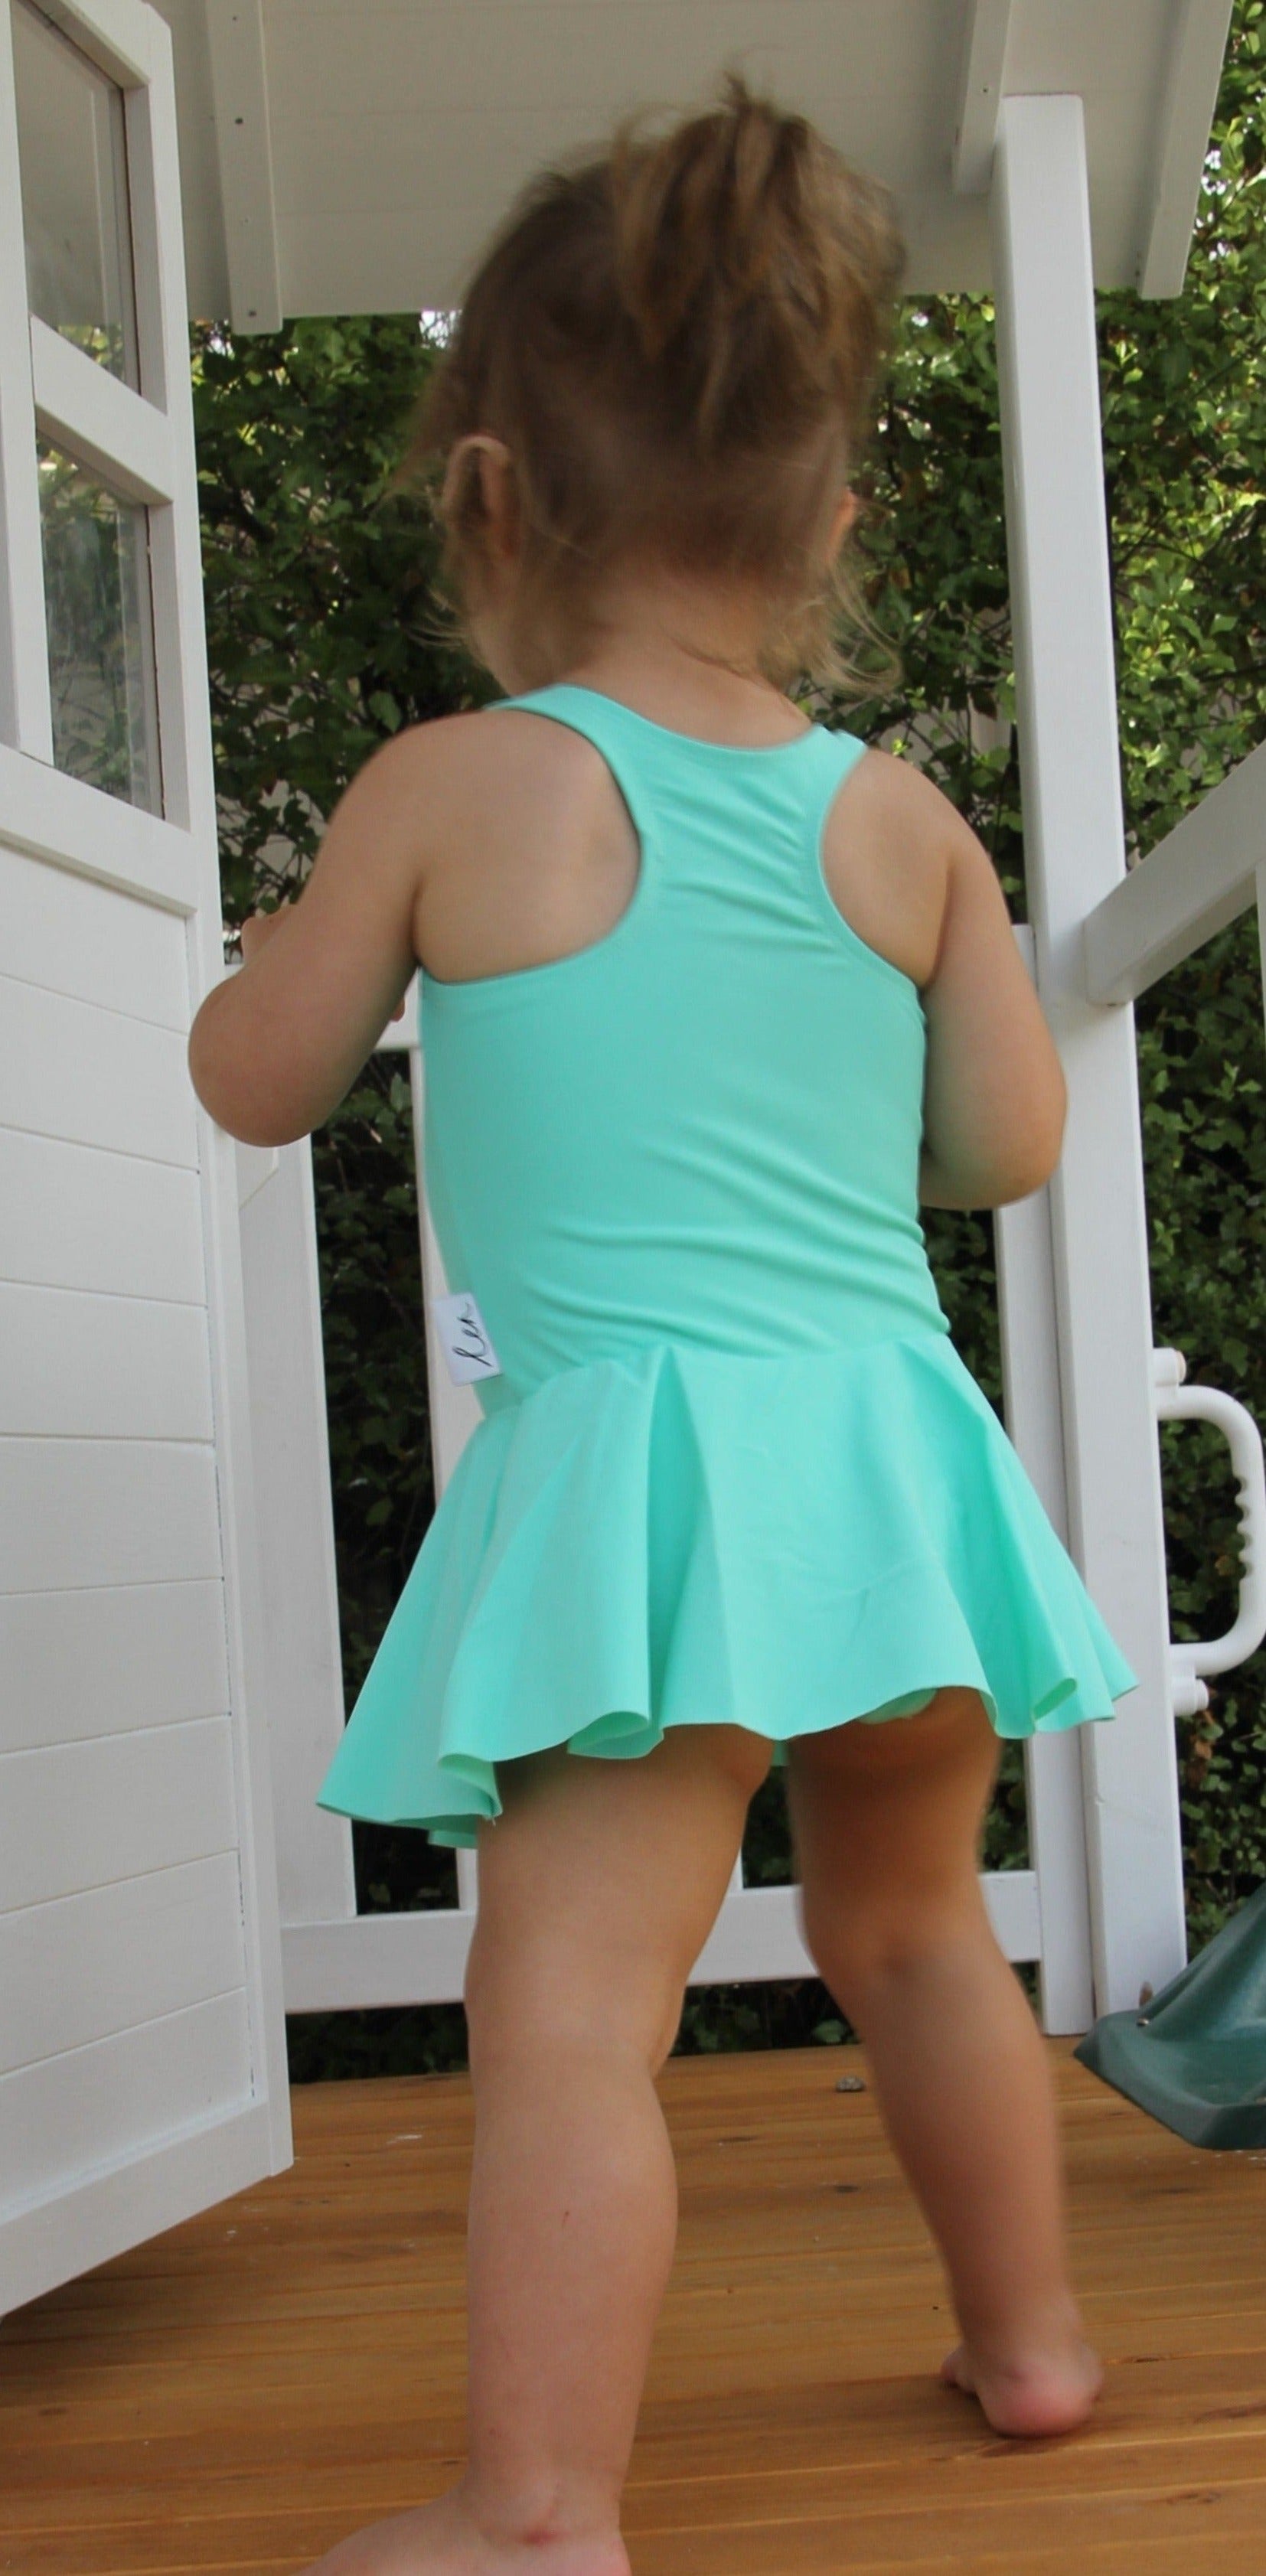 Baby toddler child wearing an aqua green swimsuit dress with snap closure at the bottom for nappy changes. They have their back to the image and are playing in a white cubby house